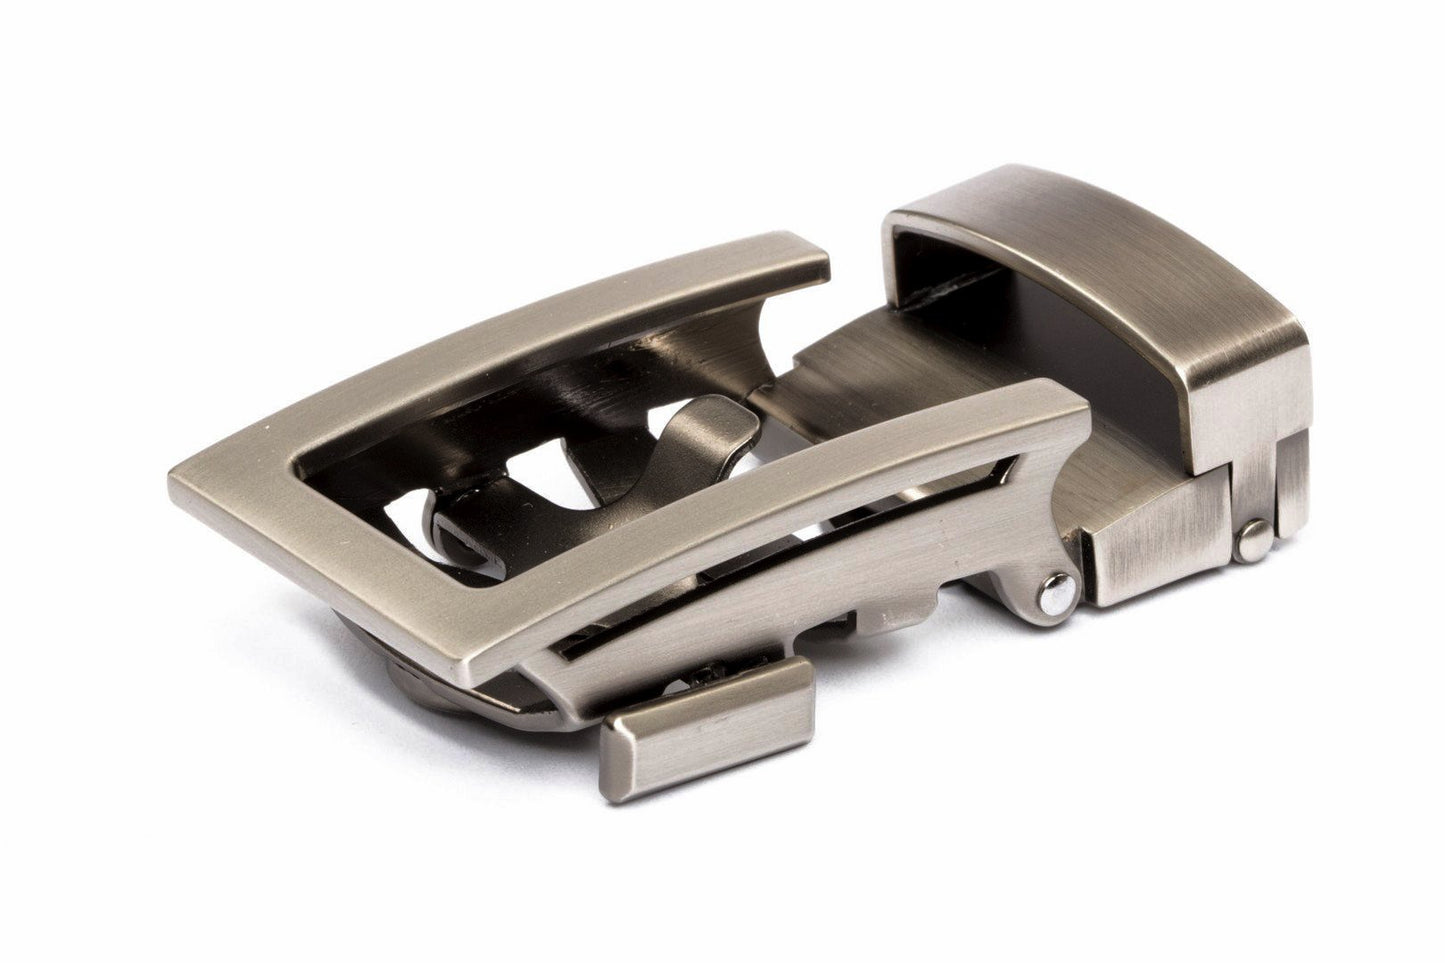 Men's traditional ratchet belt buckle in gunmetal with a 1.25-inch width.